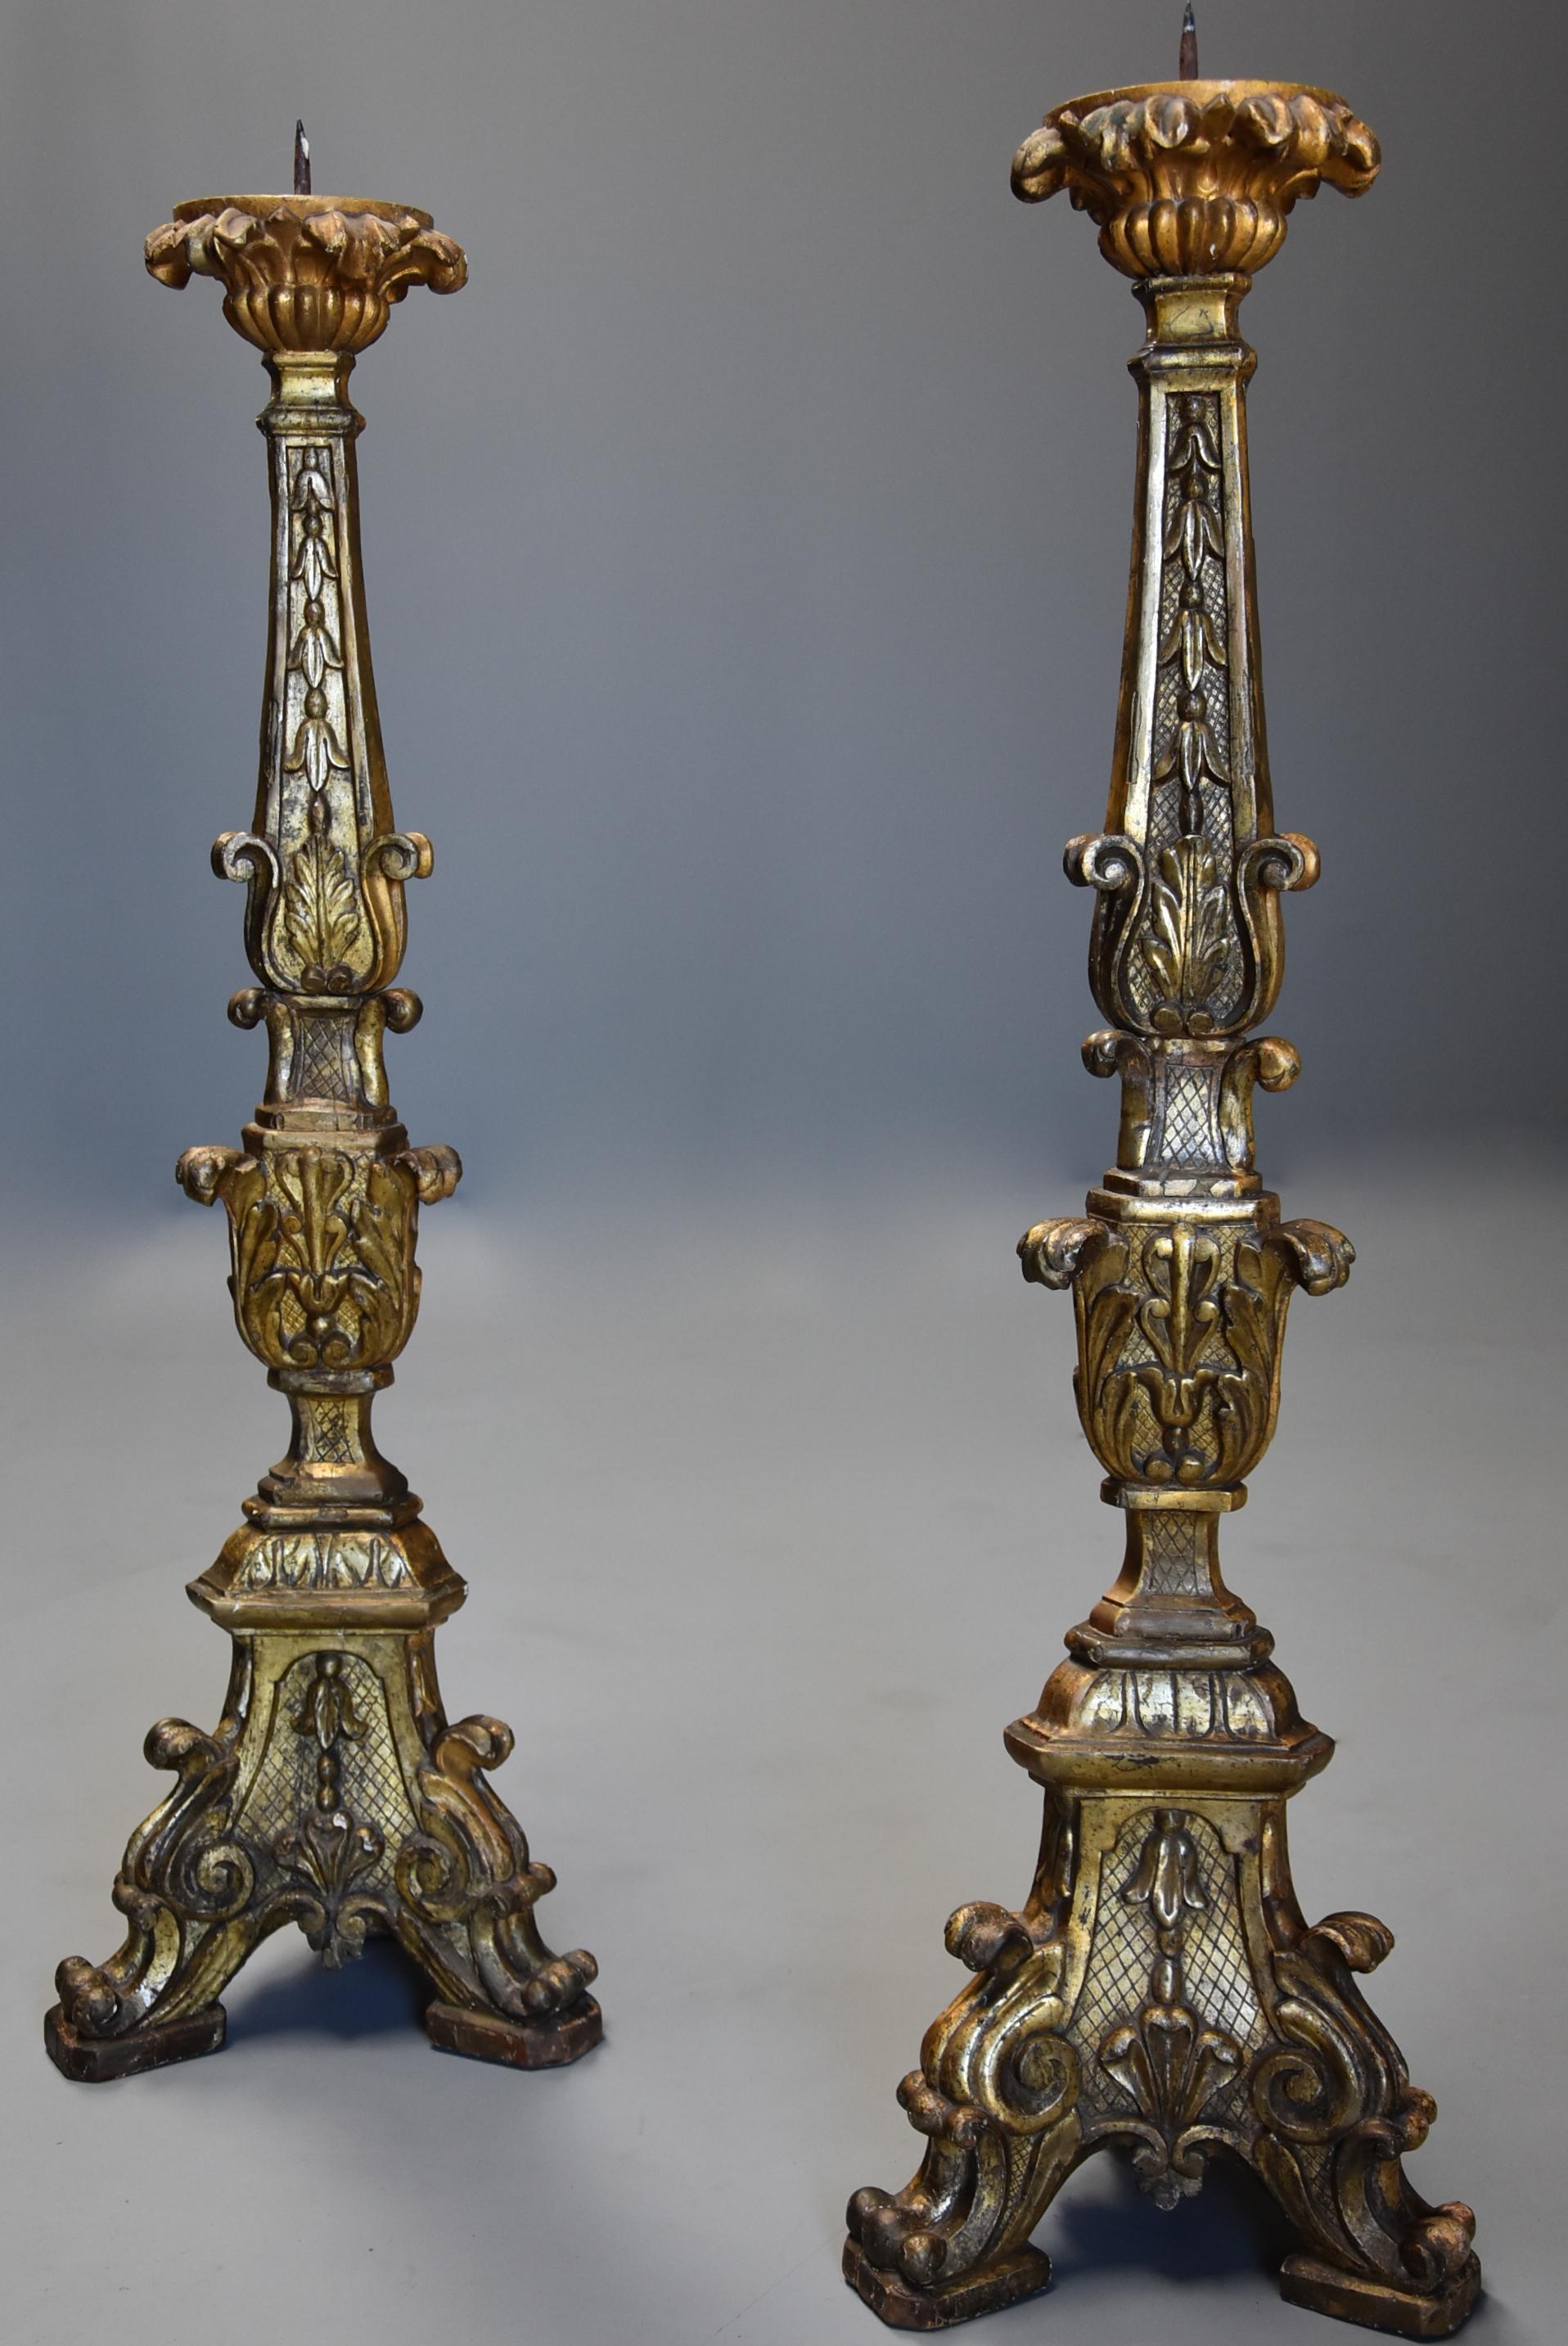 Pair of 18th Century Italian Rococo Carved Wood Gilt and Silver Gilt Prickets For Sale 2